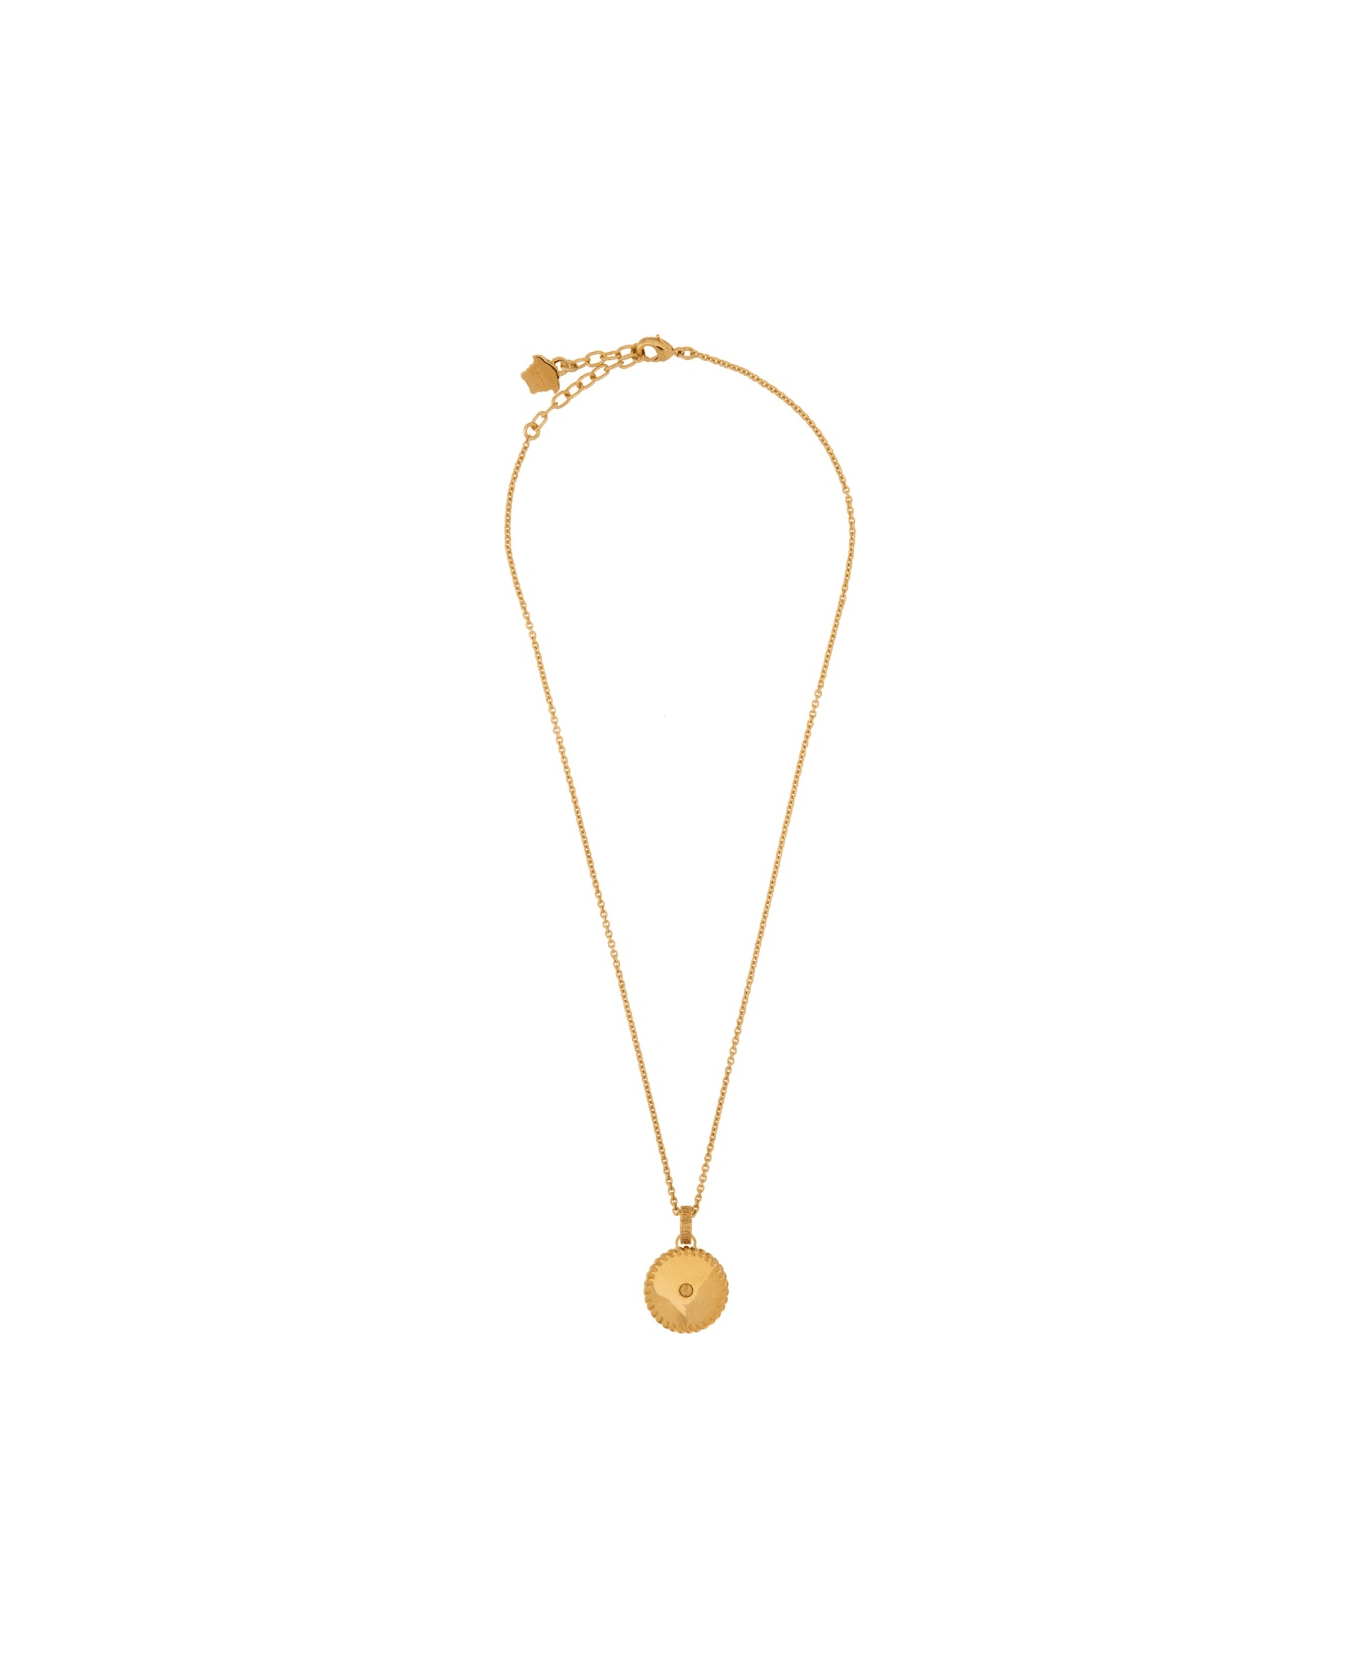 Versace 'jellyfish' Necklace - GOLD